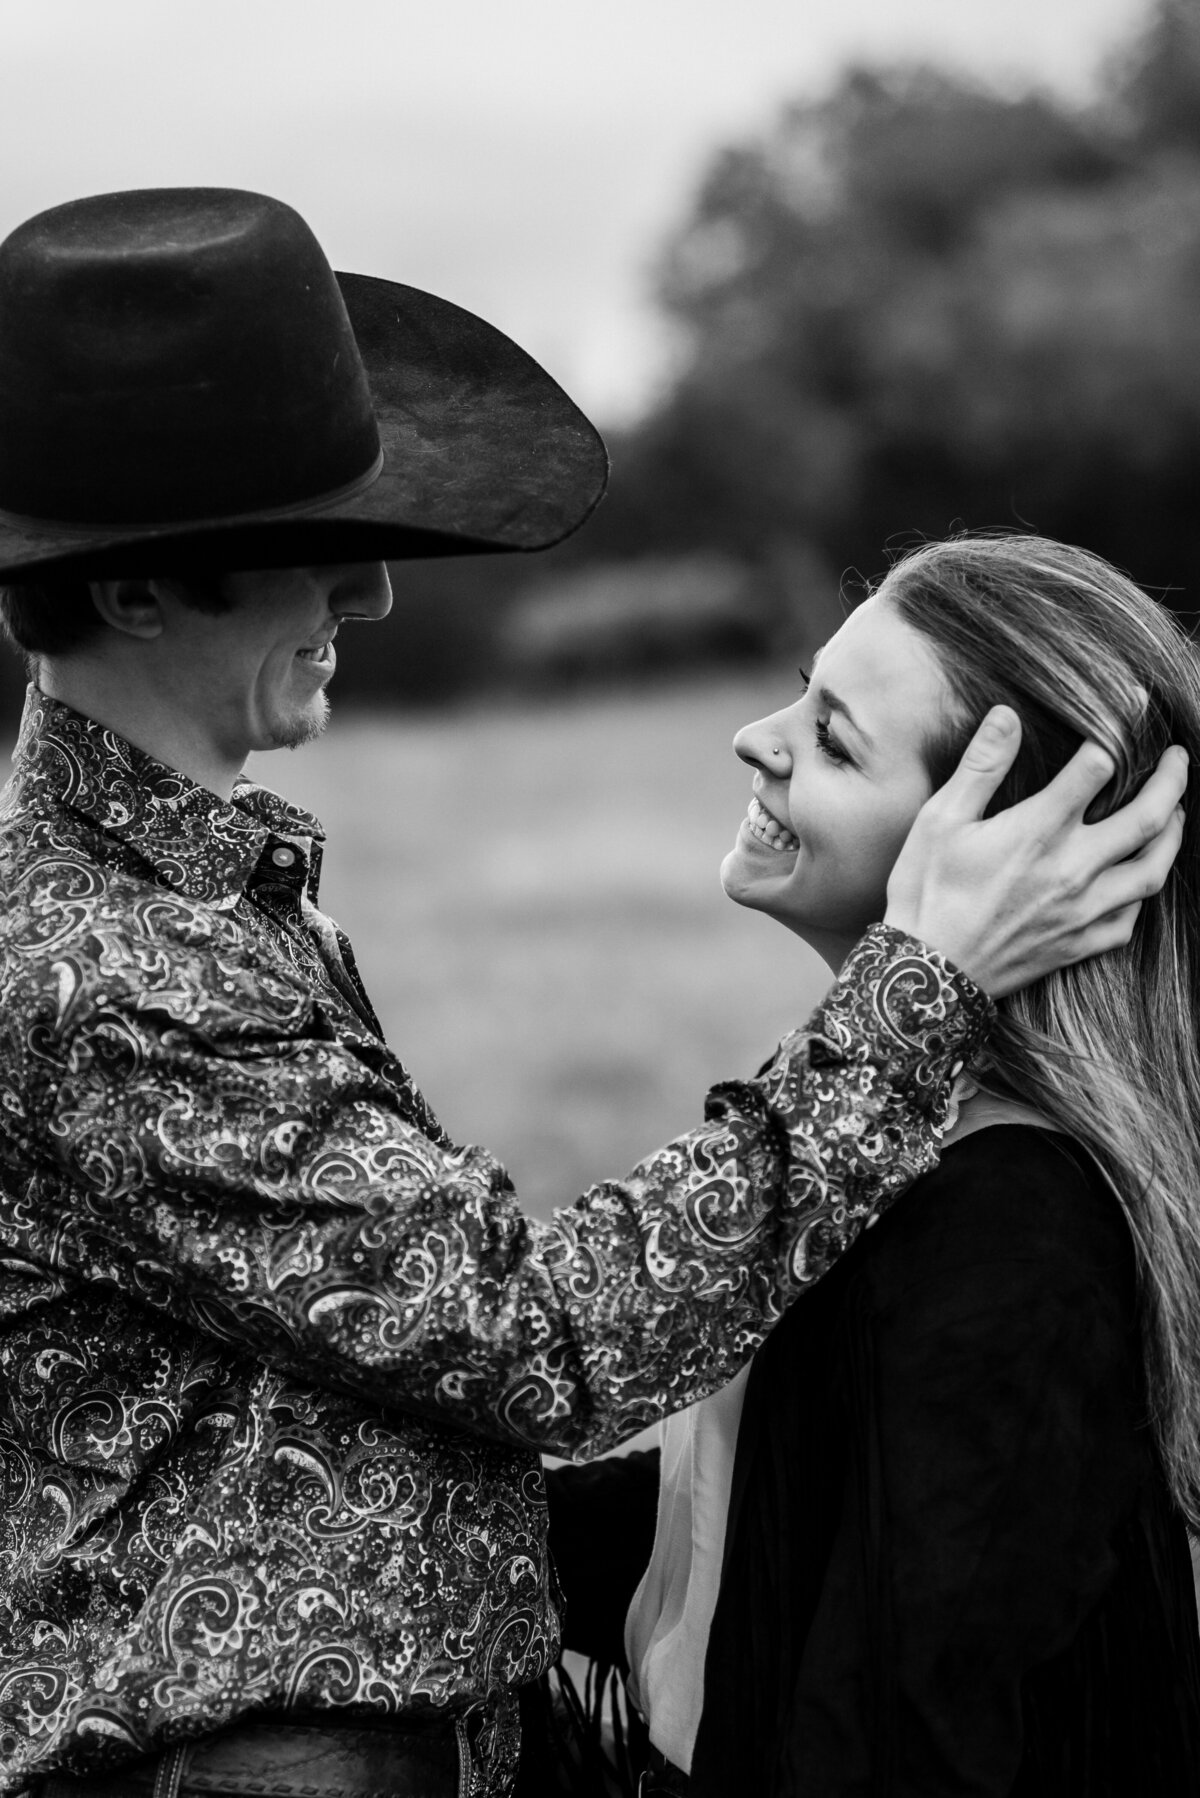 Photographer based in the Texas Hill Country specializing in Weddings, Equine, Family, Senior Graduates Photography and more